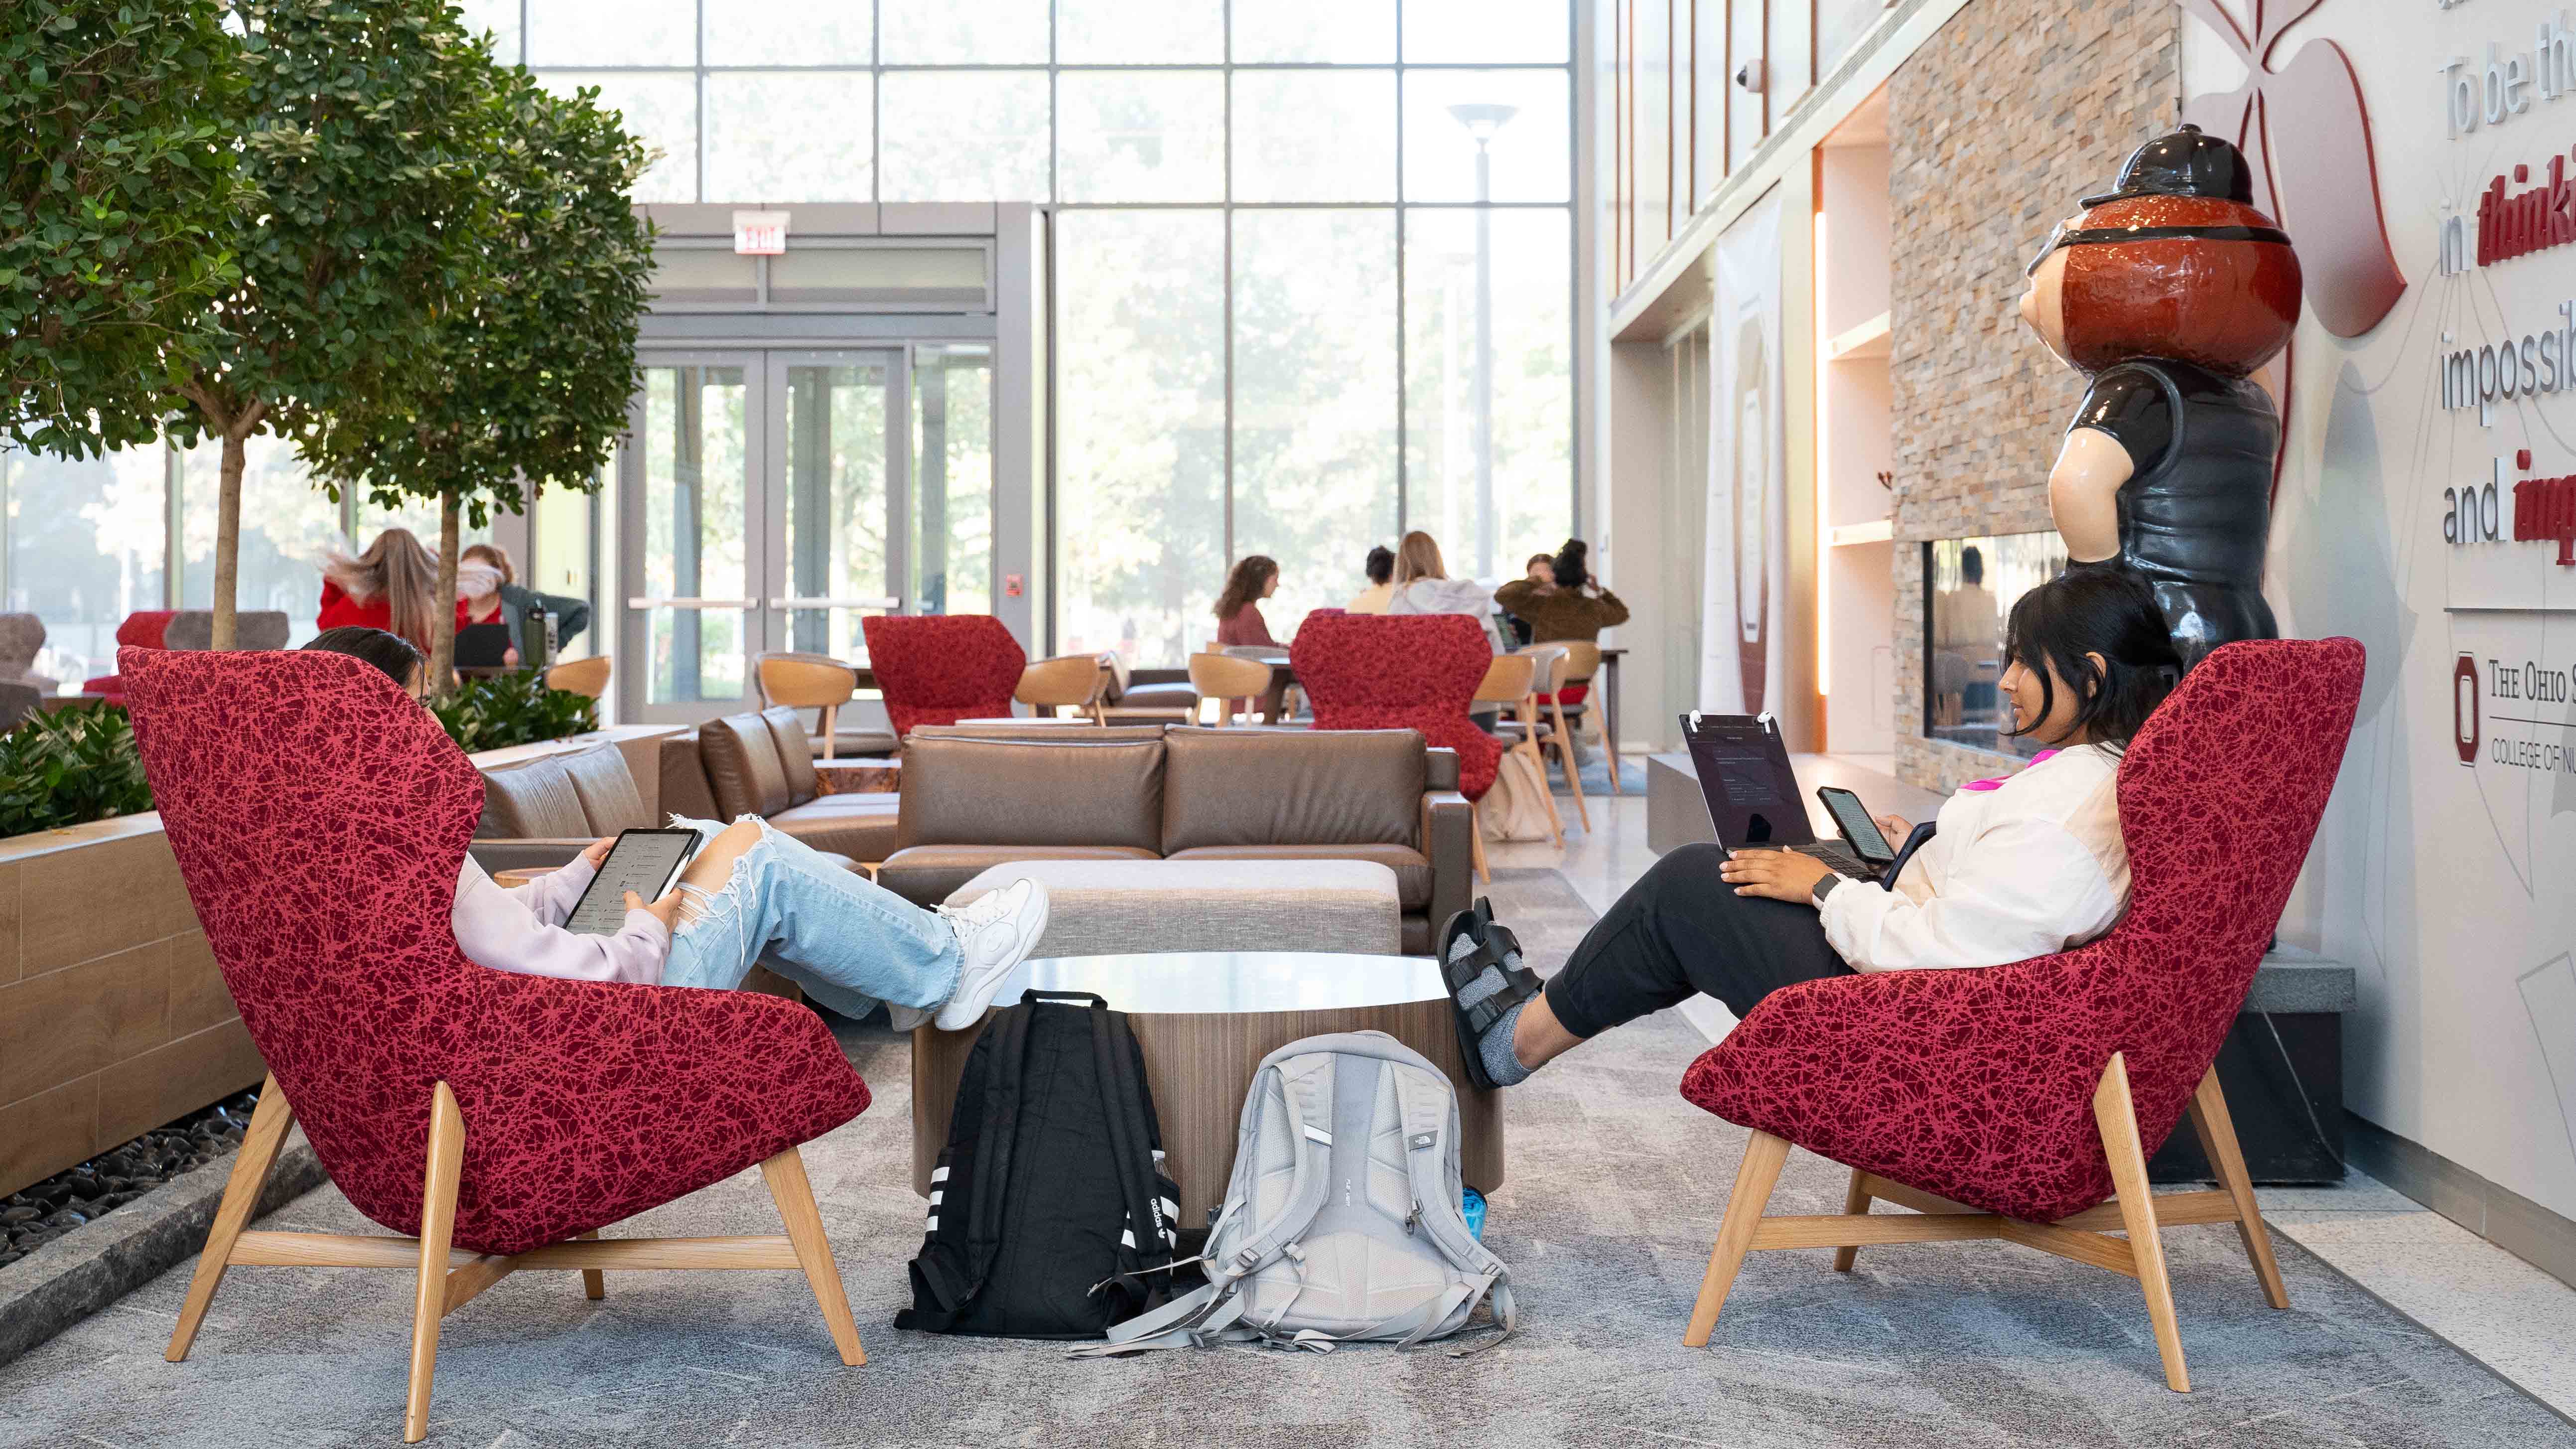 students studying in comfortable scarlet chairs in Heminger Hall atrium